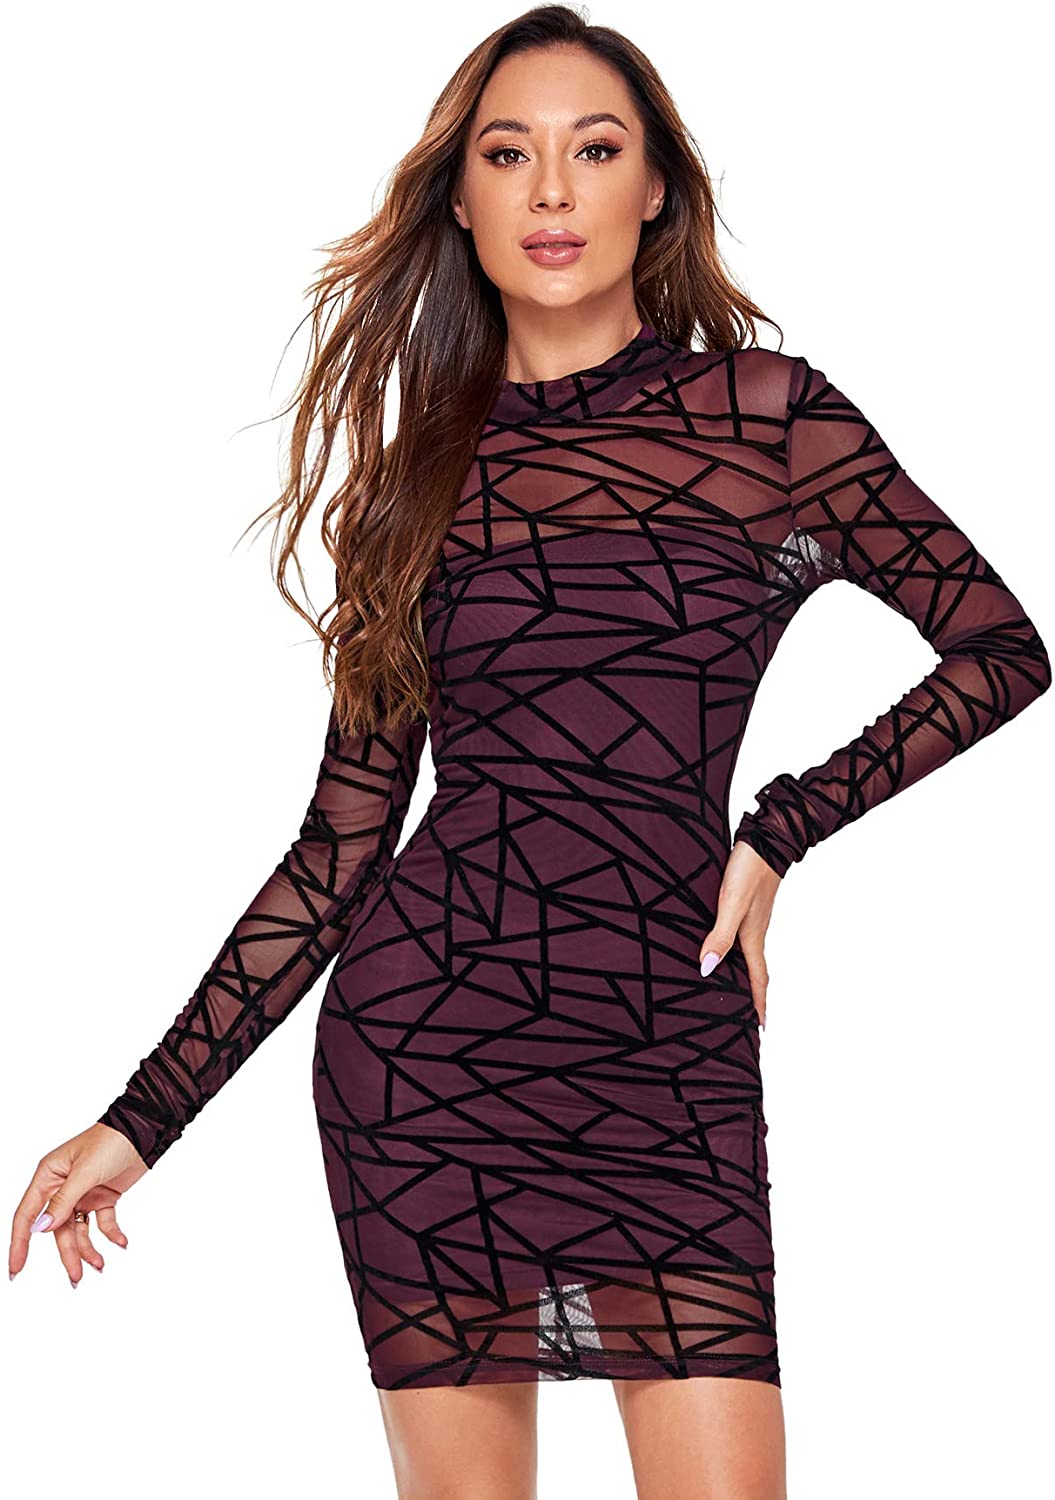 ROMWE Womens See Through Mesh Long Sleeve Stretch Bodycon Dress Without Camisole